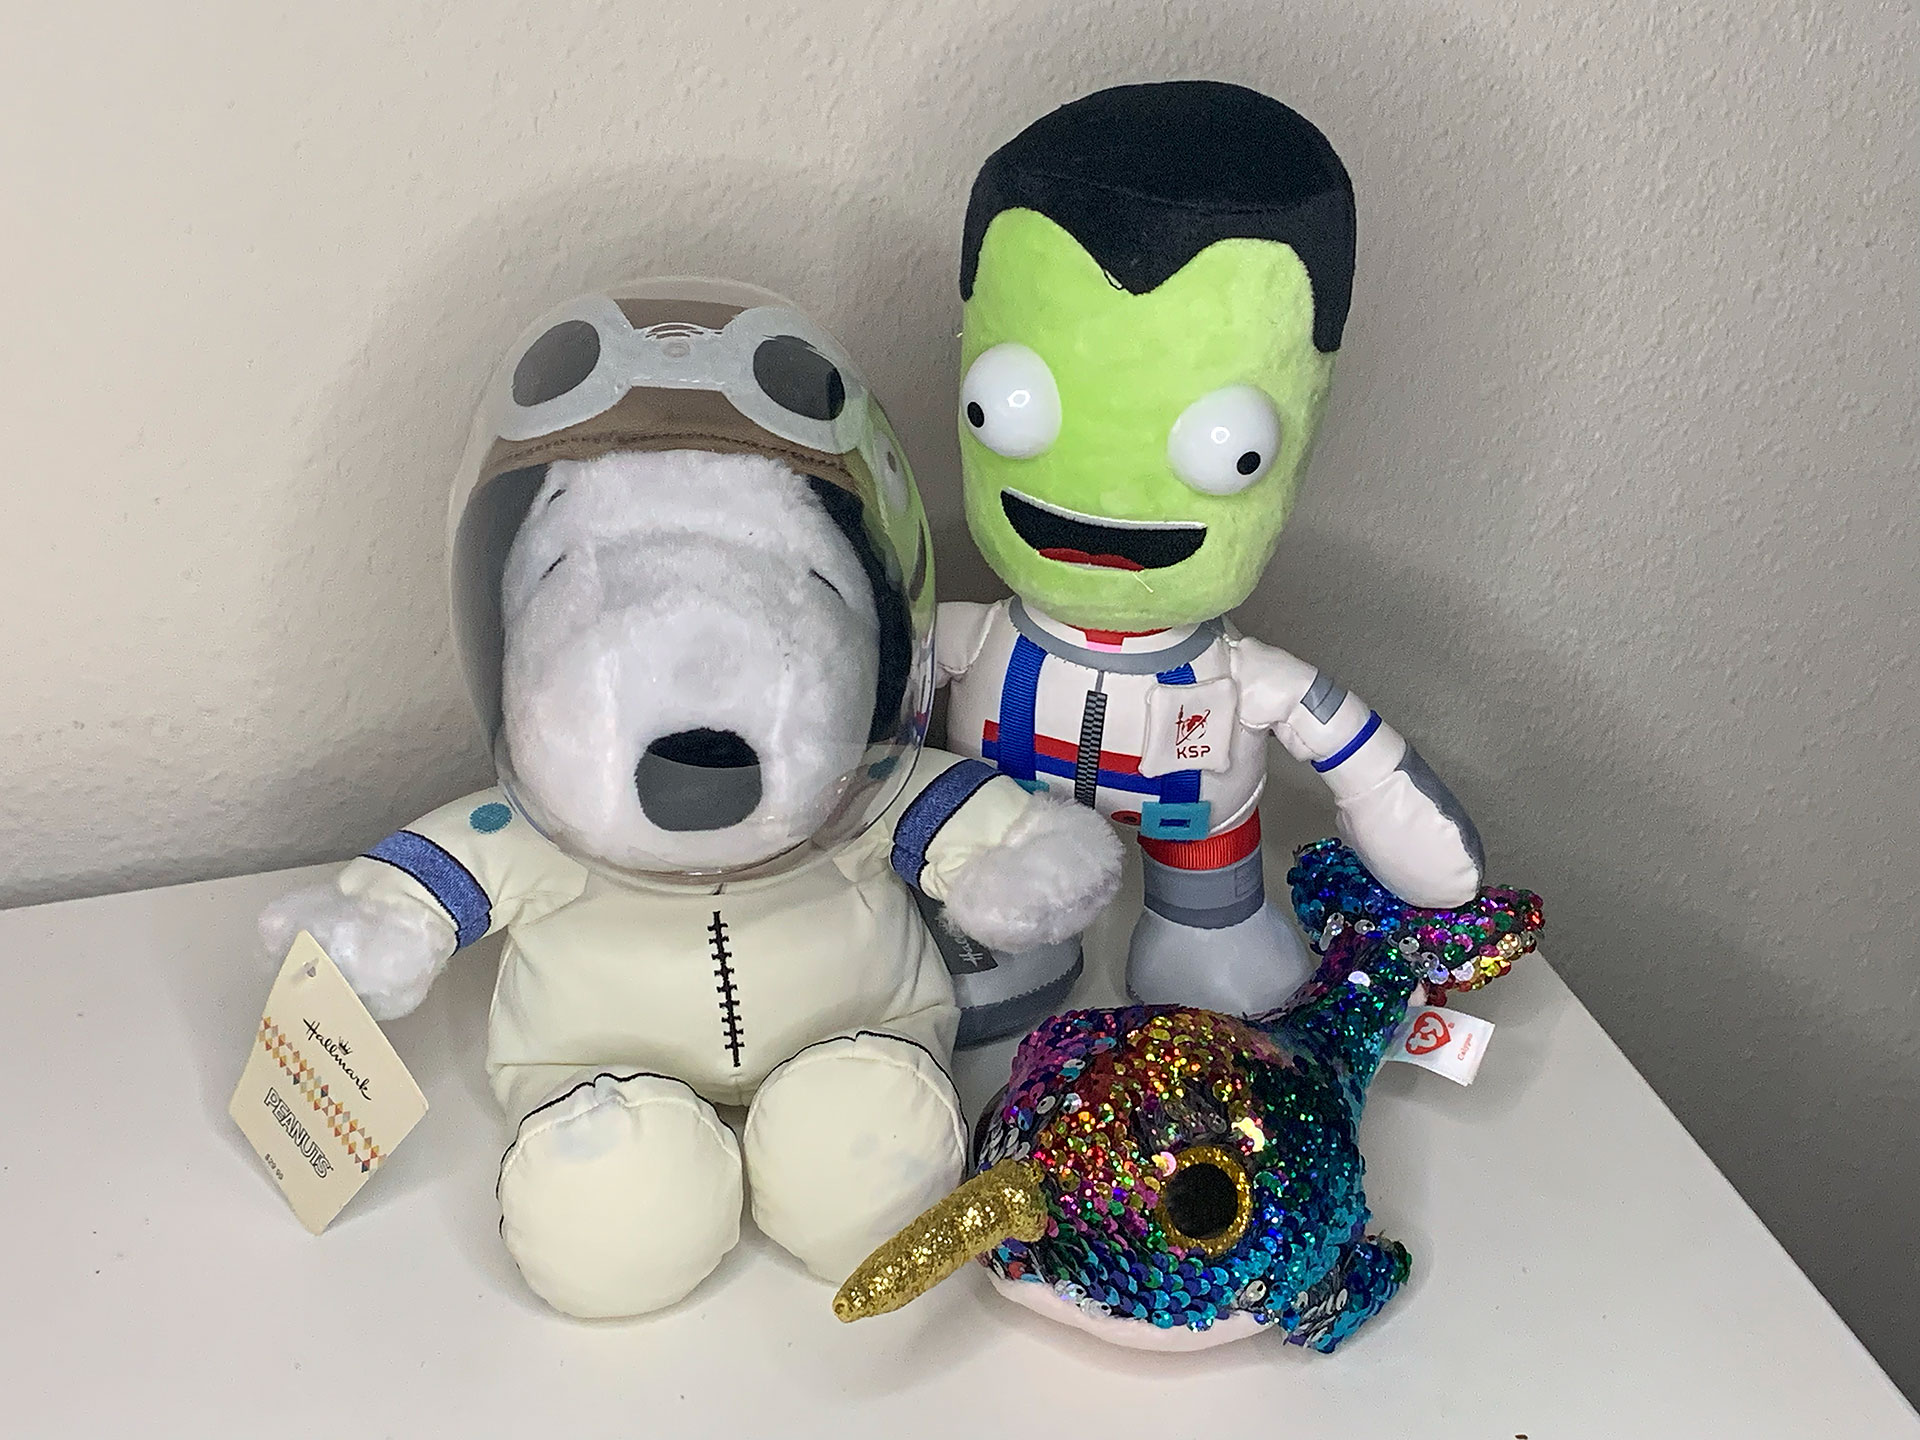 'sparkly' narwhal toy trades sea for space as boeing starliner zero-g indicator